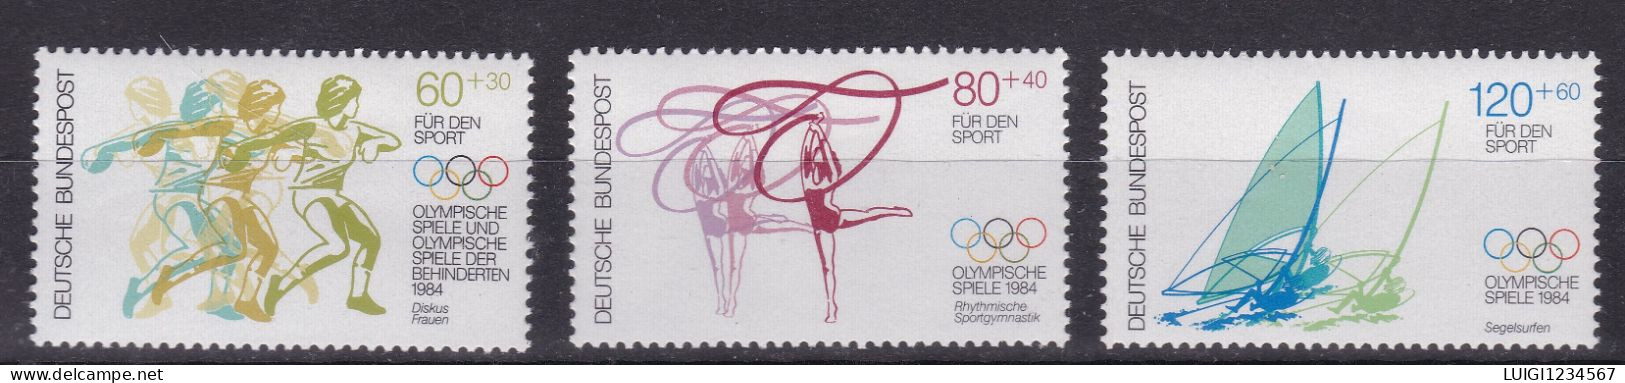 GERMANIA NUOVO MNH ** DISCIPLINE OLIMPICHE - Sommer 1984: Los Angeles